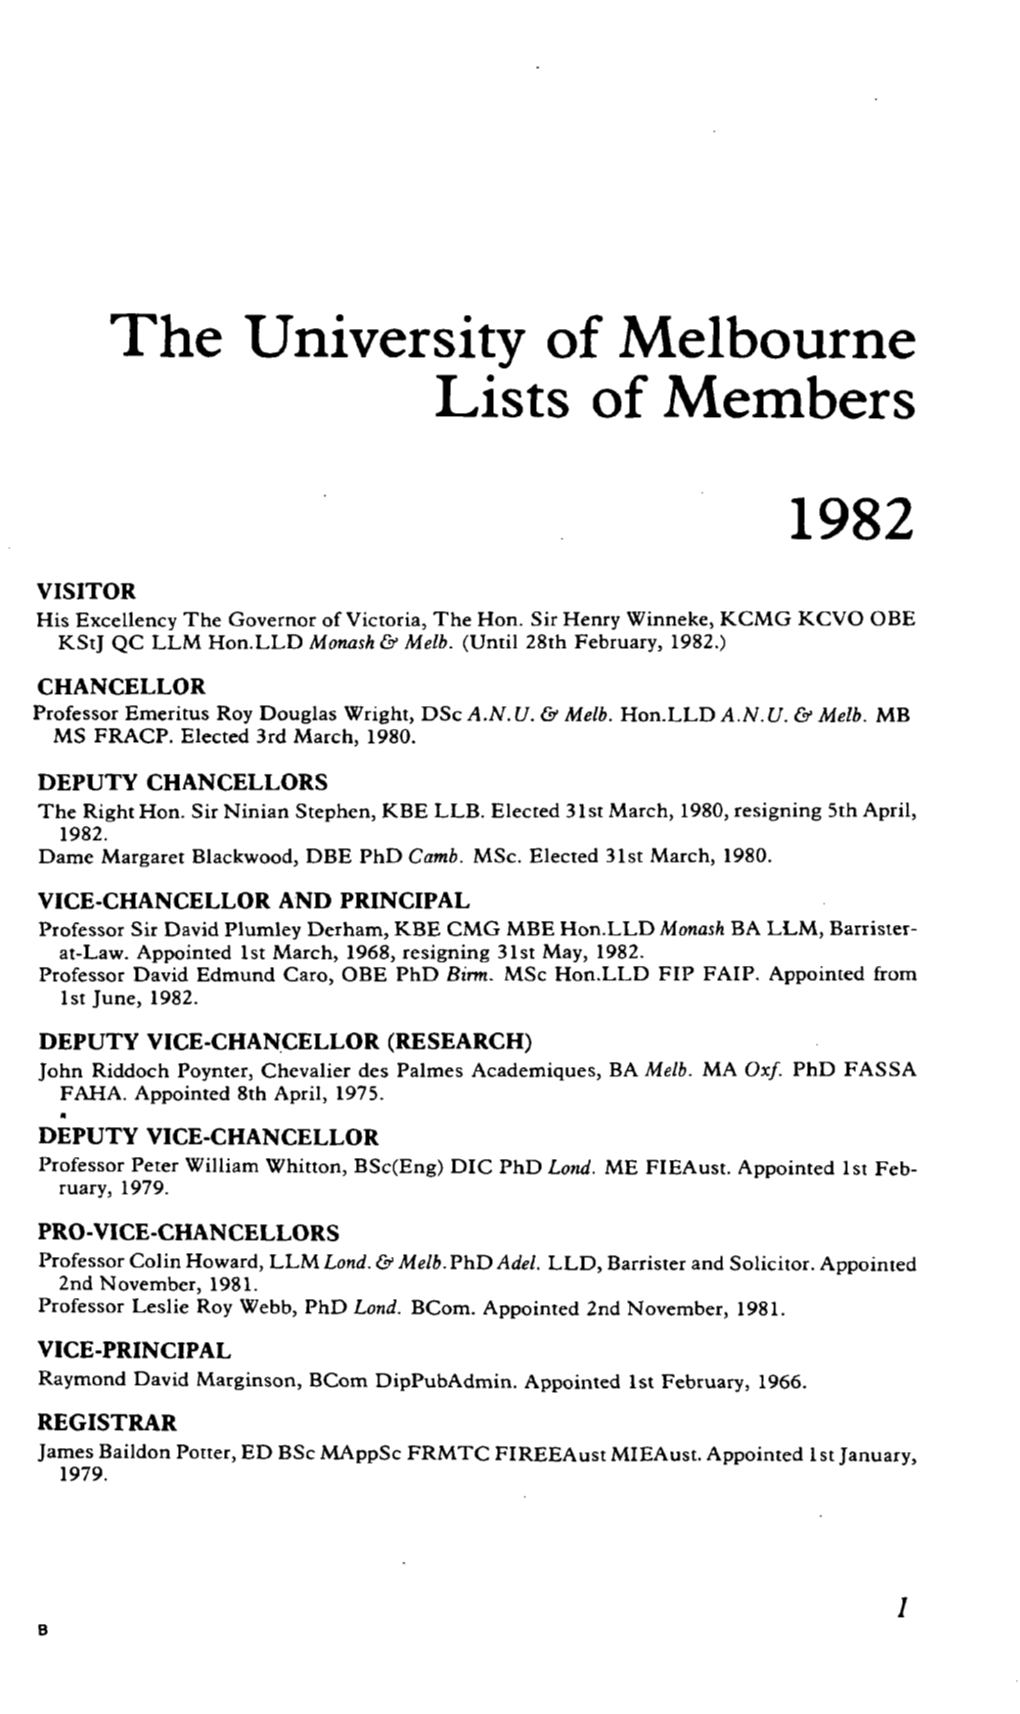 The University of Melbourne Lists of Members 1982